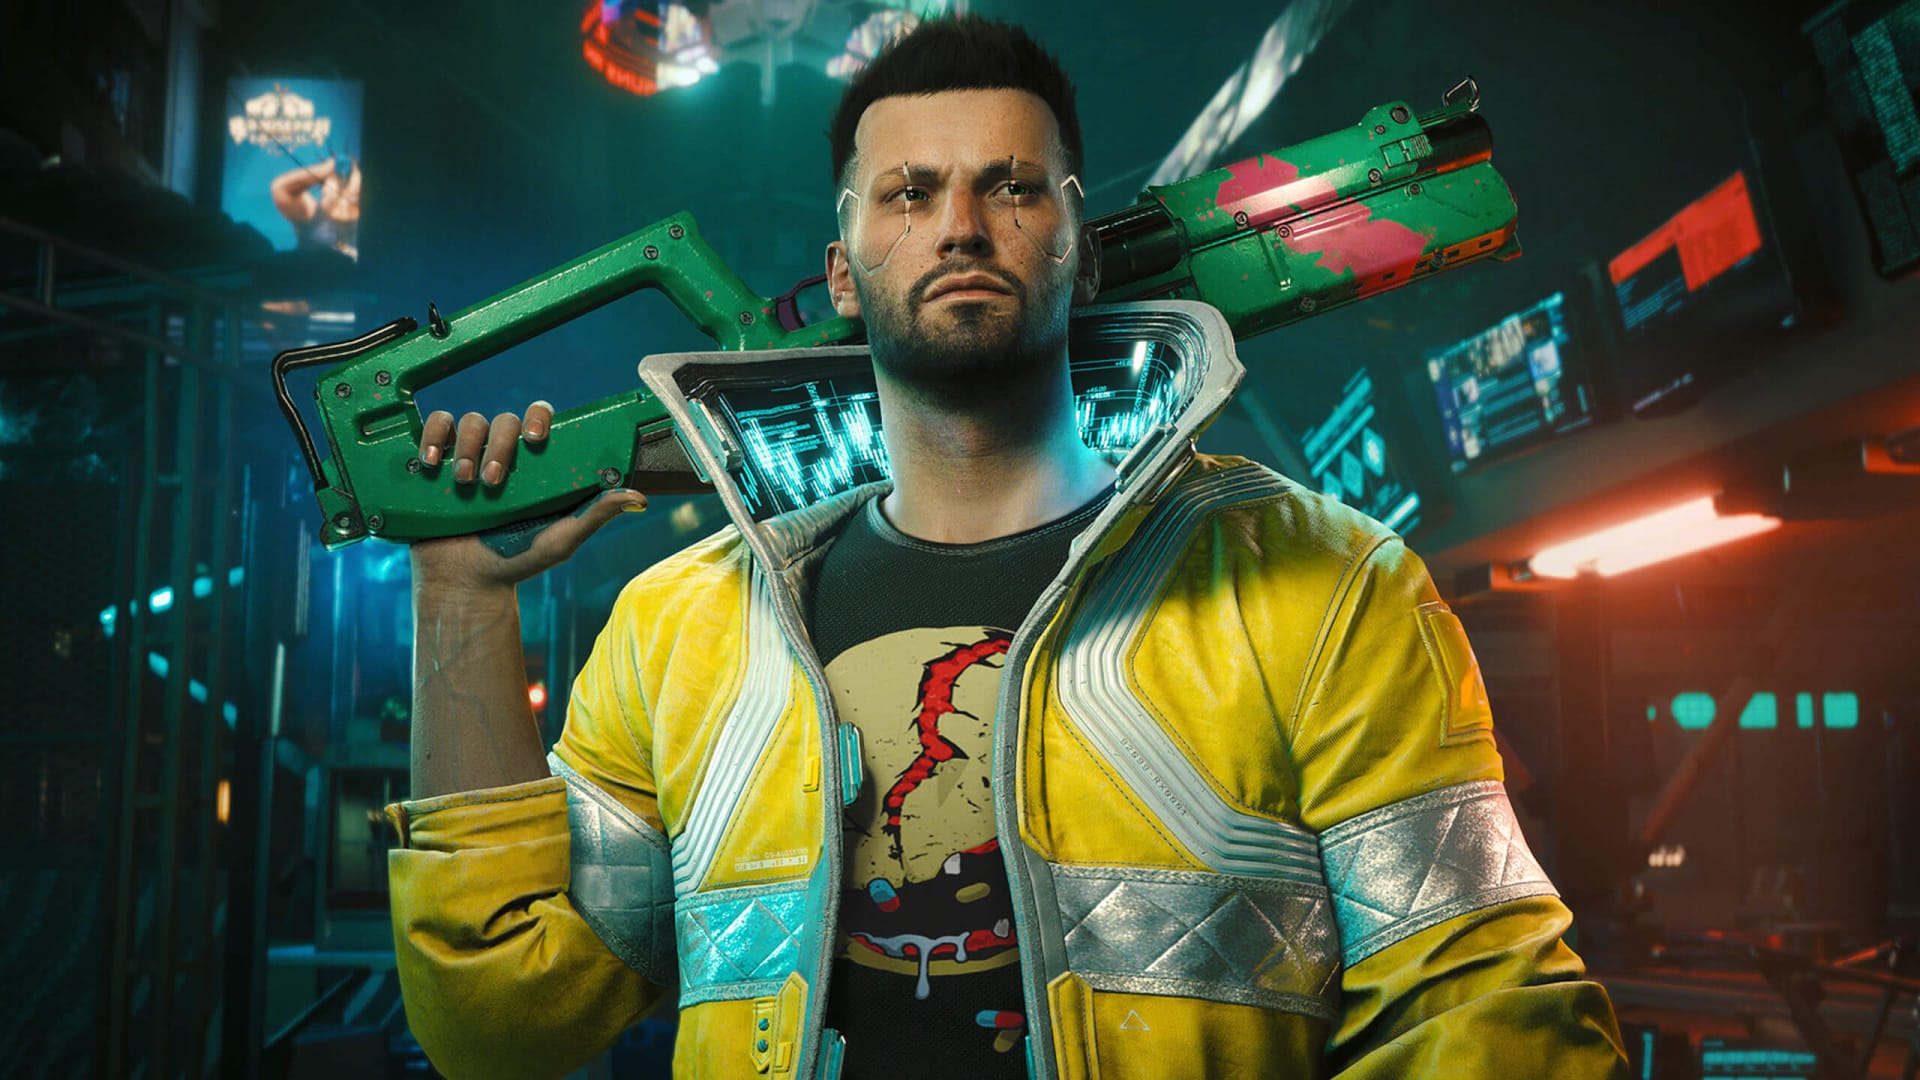 Cyberpunk 2077 Update 2.1 Patch Notes Detail Extensive Changes Including Metro System and More